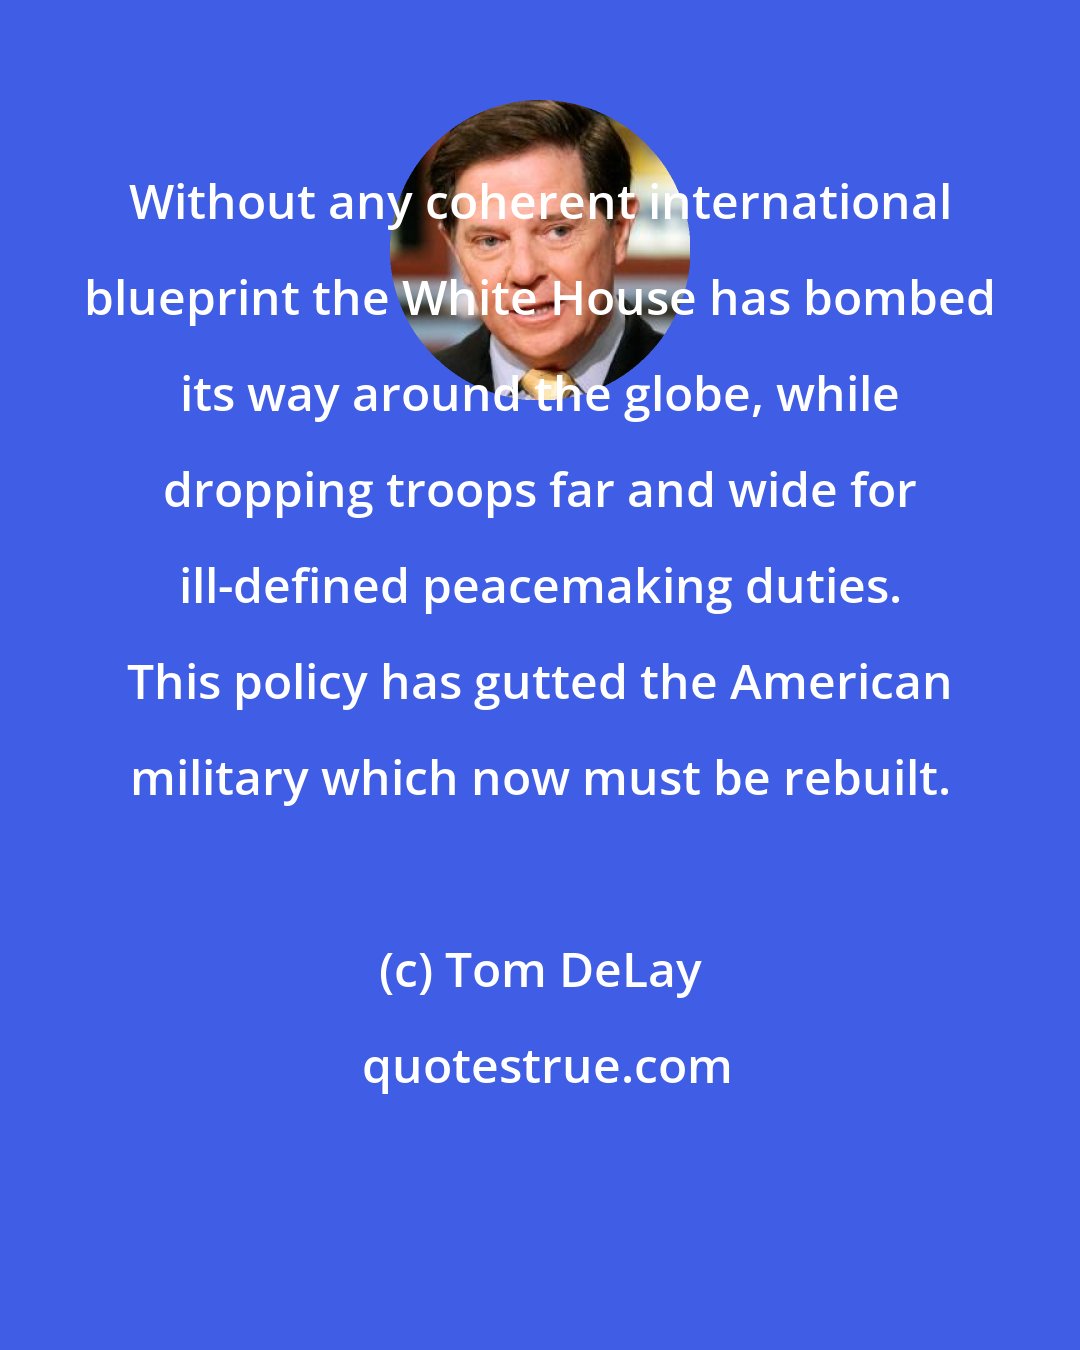 Tom DeLay: Without any coherent international blueprint the White House has bombed its way around the globe, while dropping troops far and wide for ill-defined peacemaking duties. This policy has gutted the American military which now must be rebuilt.